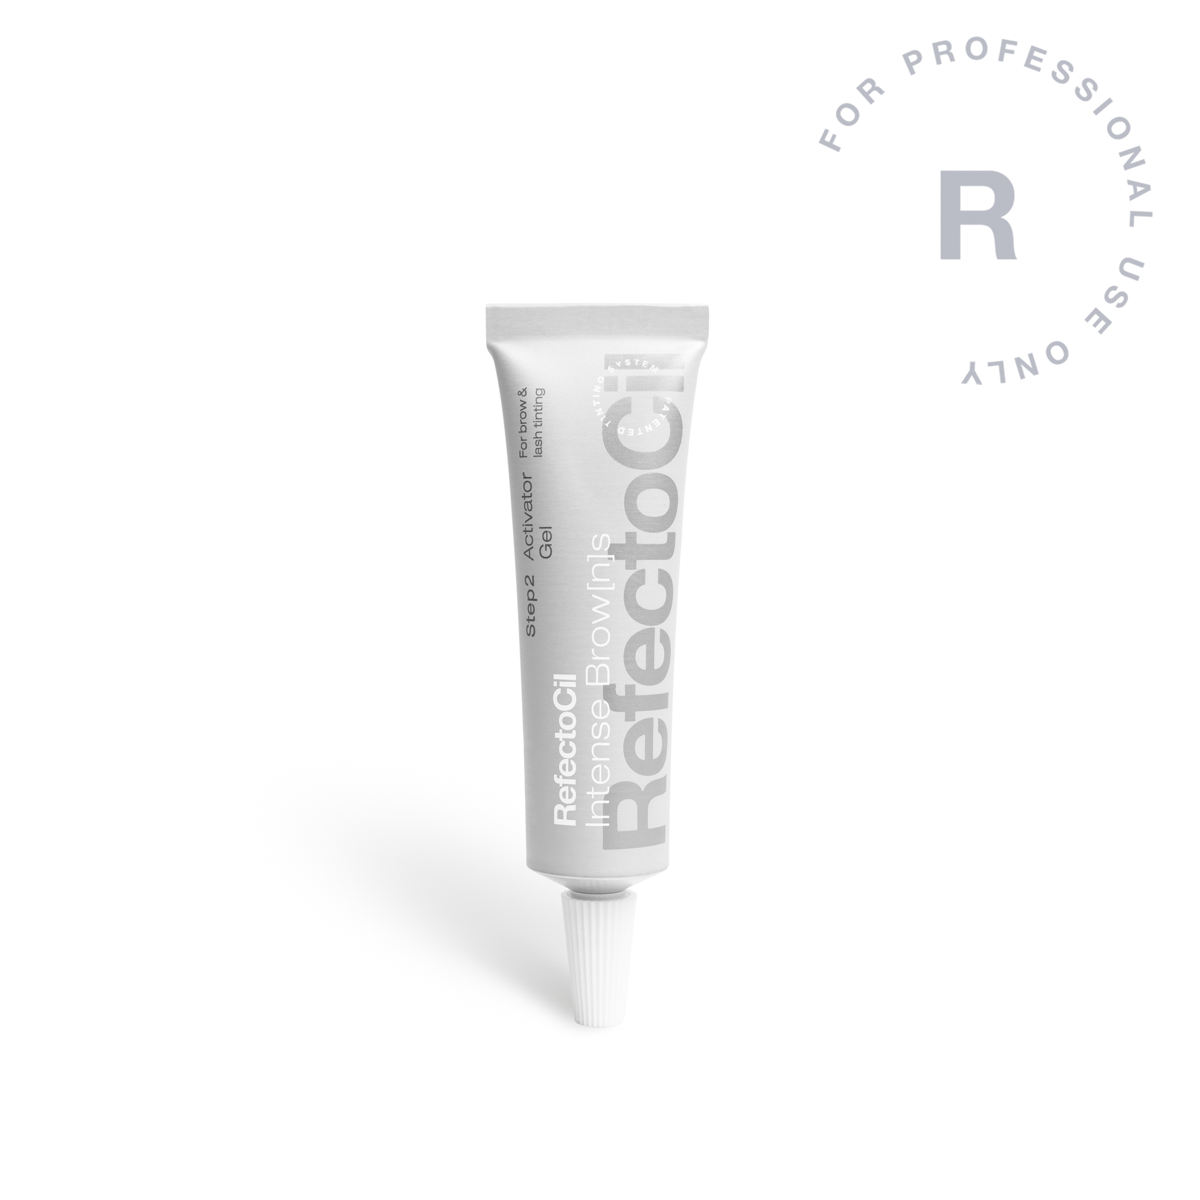 RefectoCil Intense Brow[n]s - Activator Gel 15ml - Creata Beauty - Professional Beauty Products